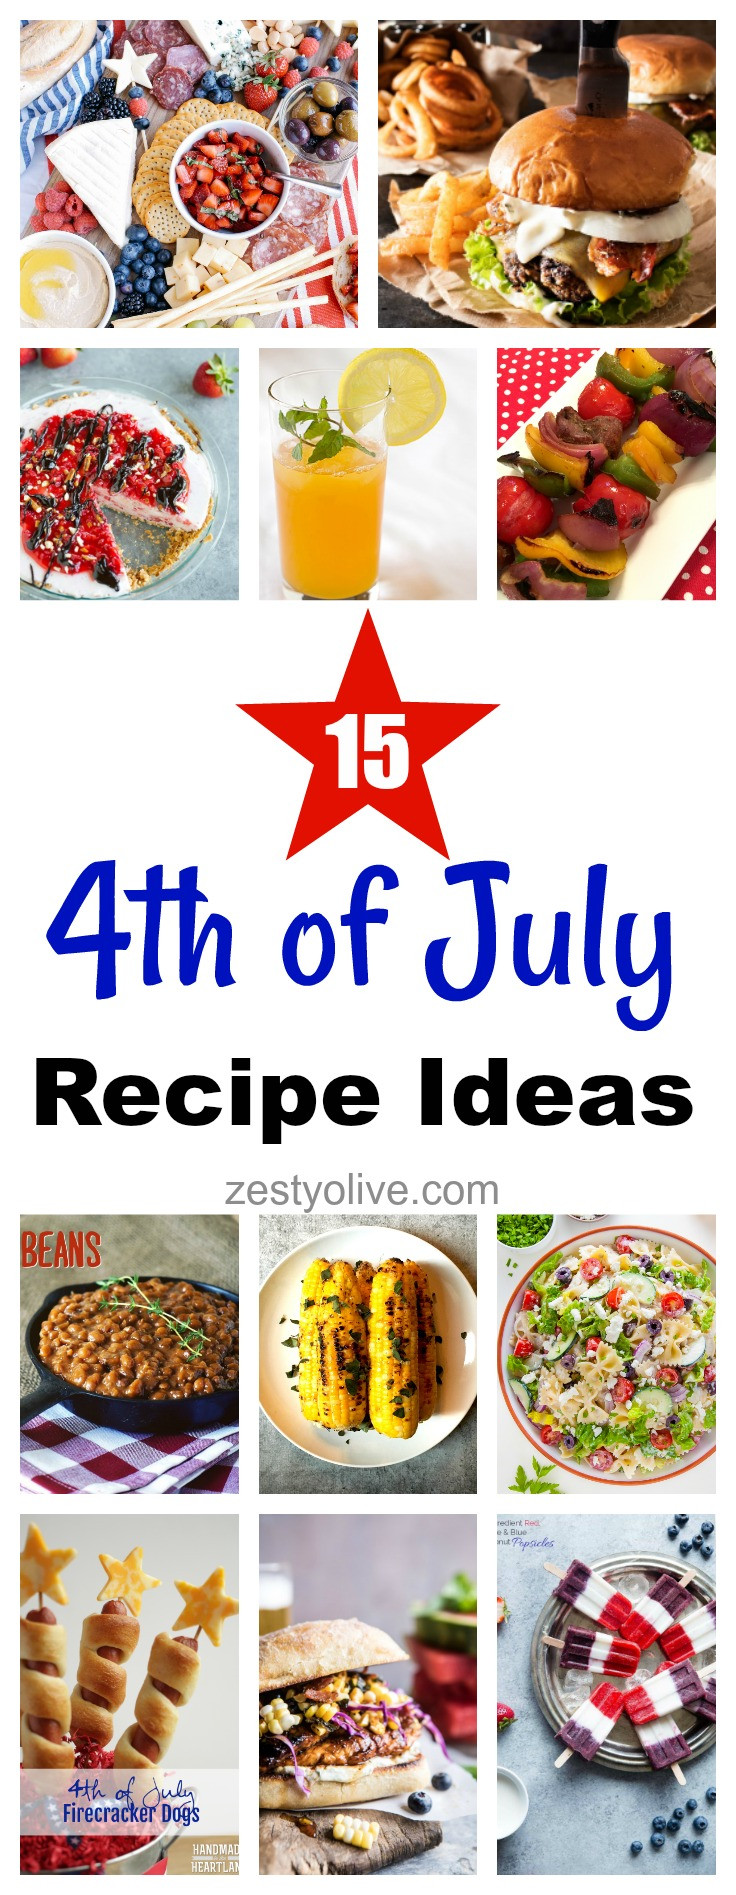 Fourth Of July Recipe Ideas
 15 Fourth of July Recipe Ideas Zesty Olive Simple